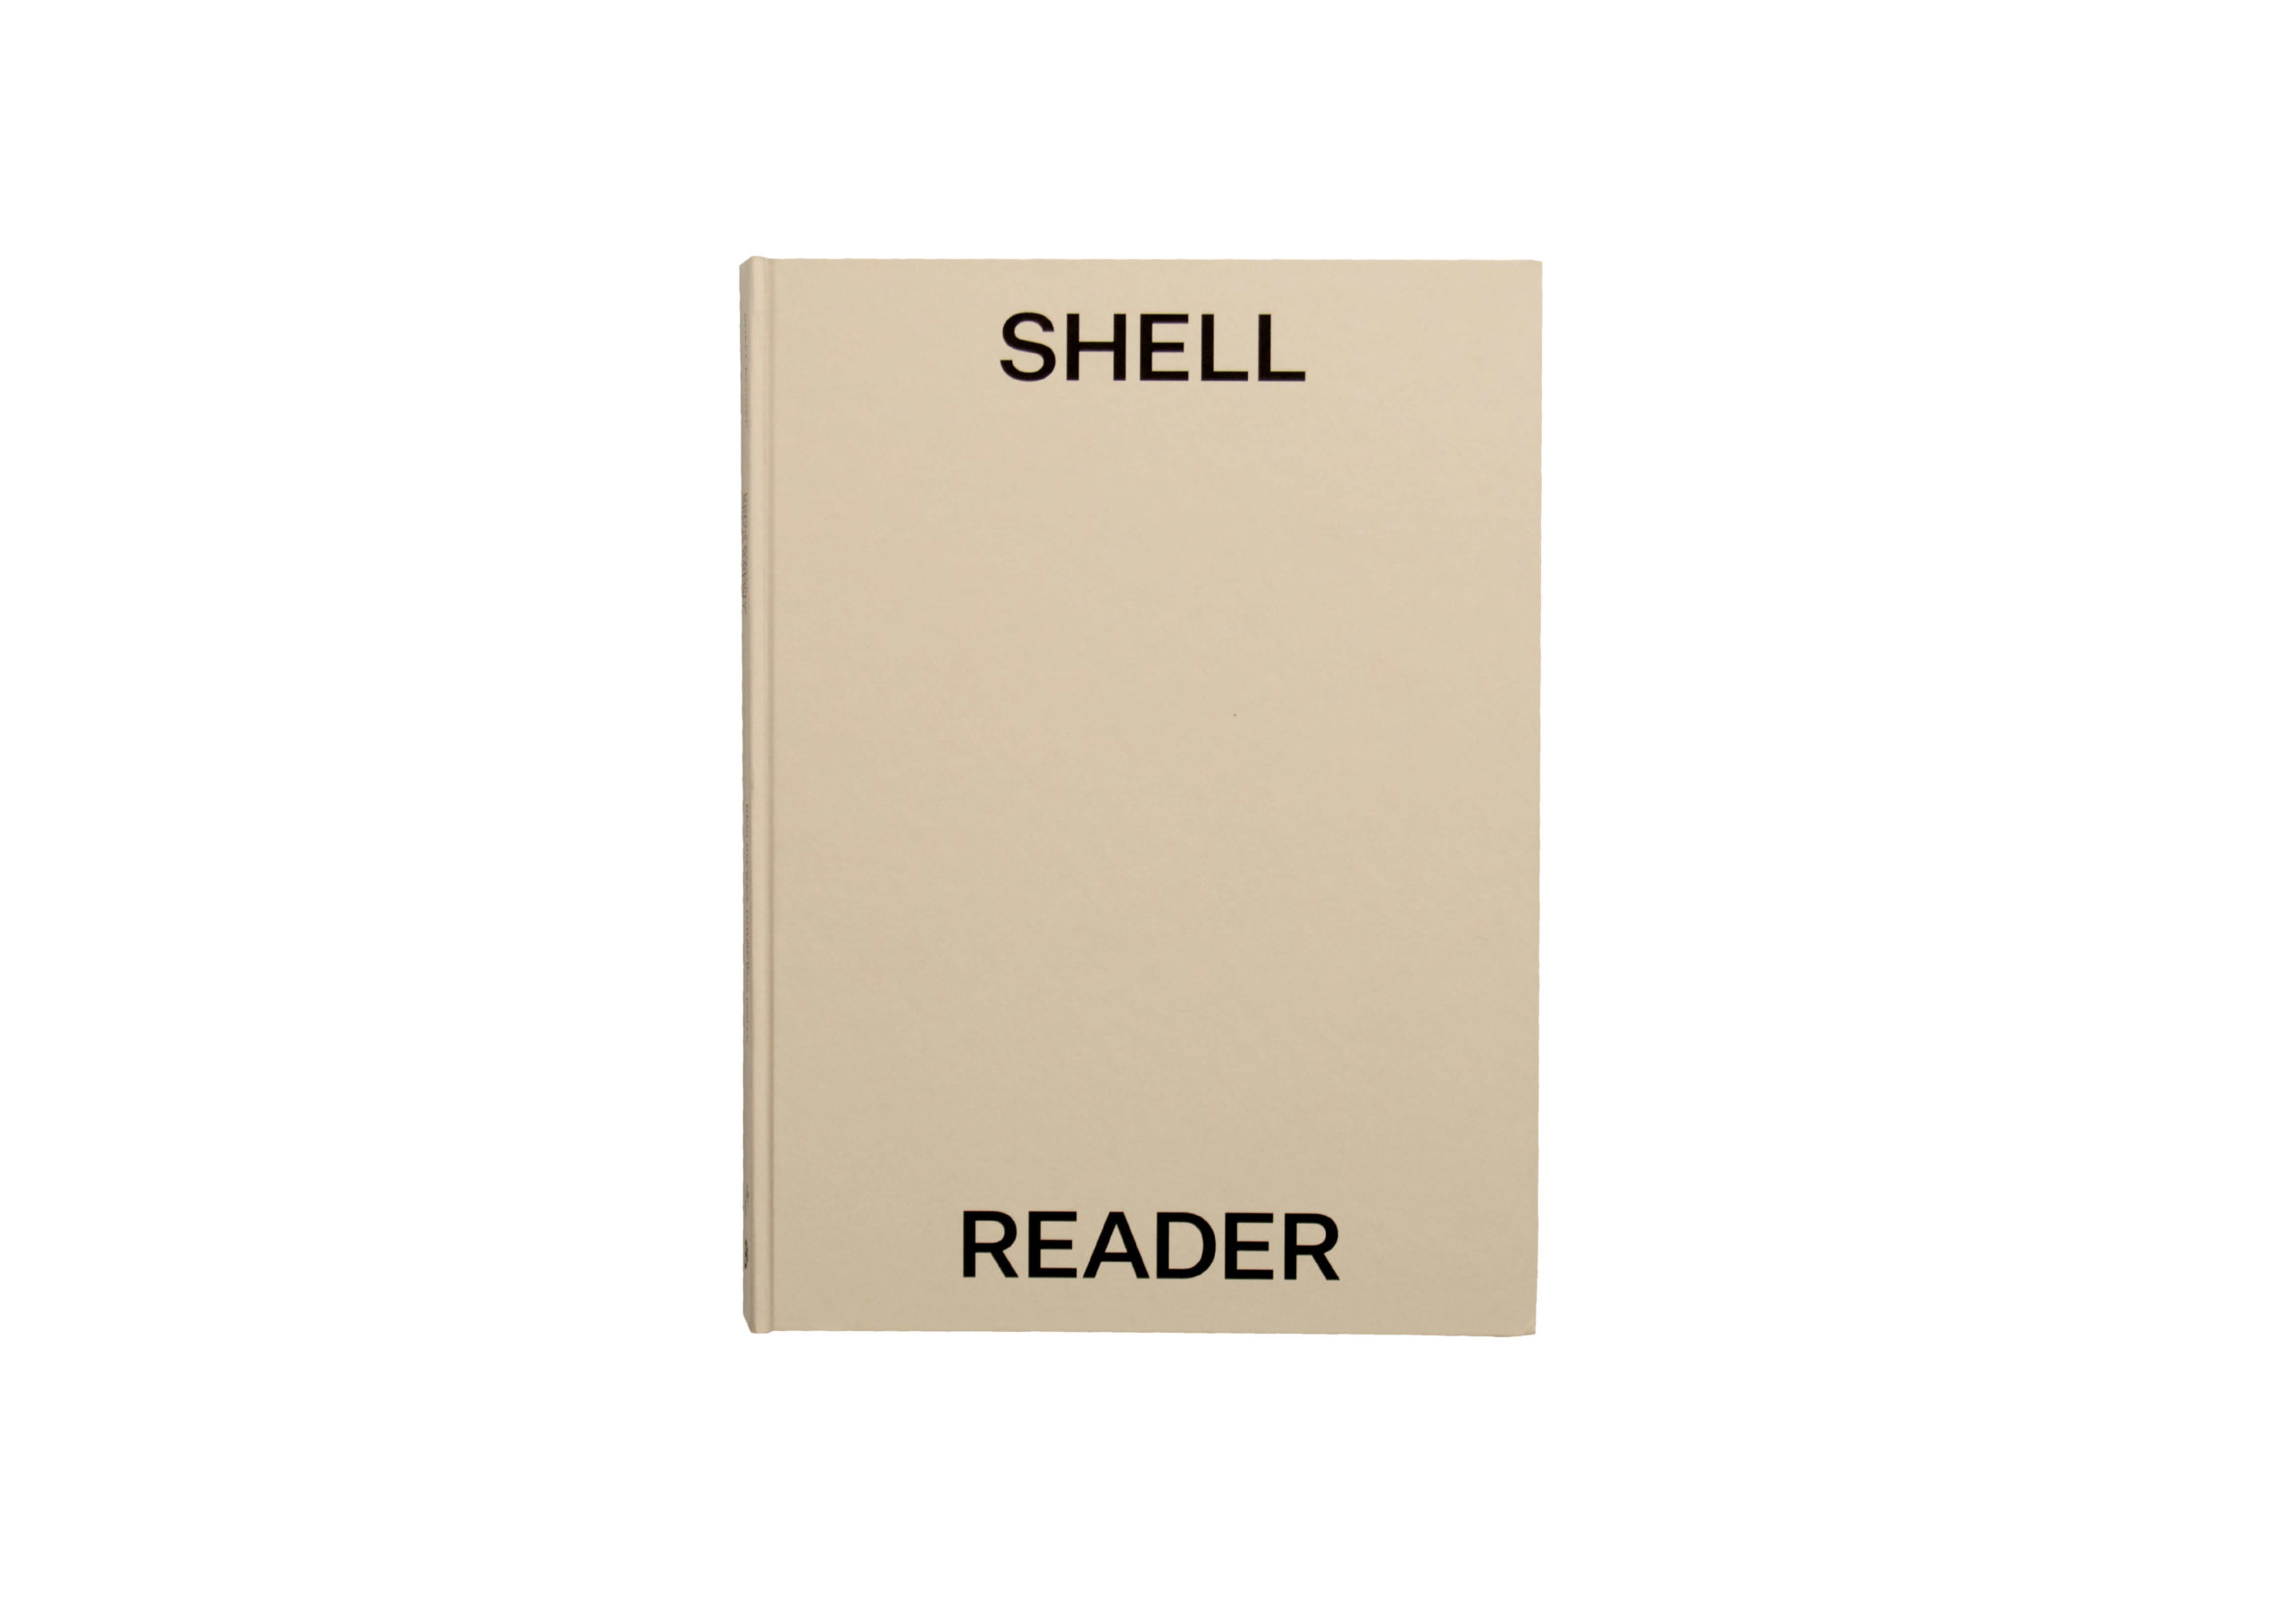 Shell Reader by Nina Canell